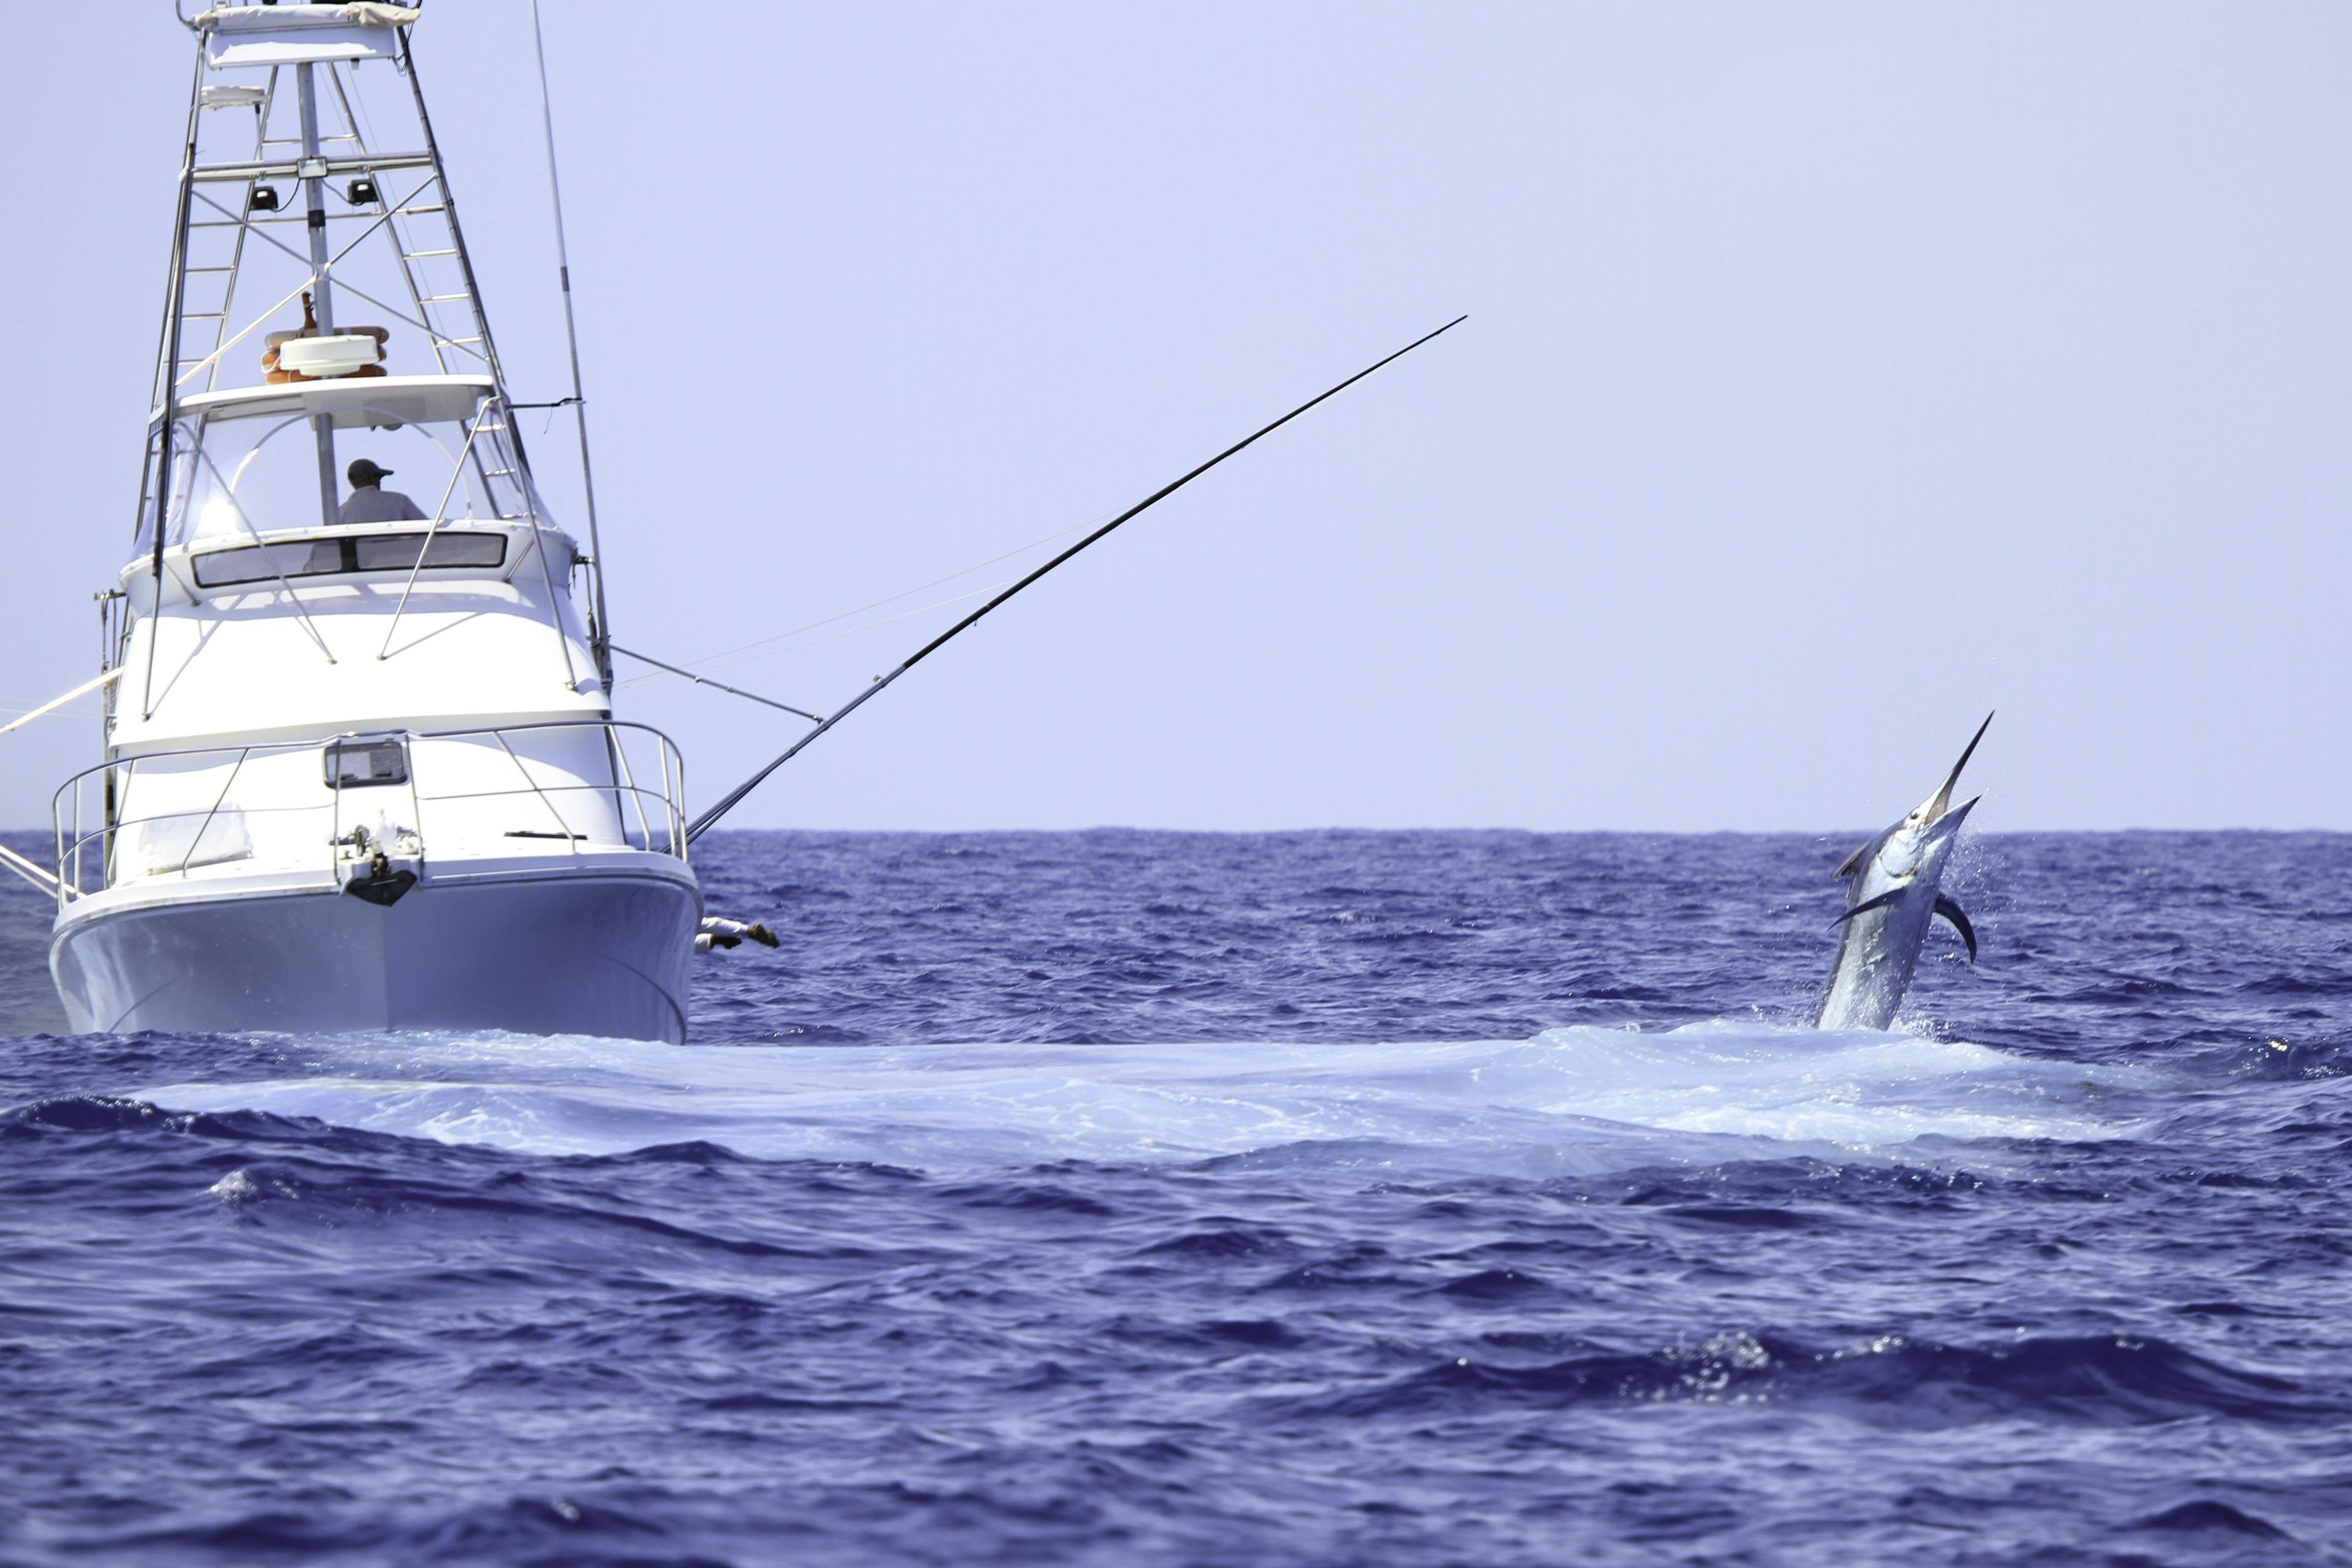 Find adventure with fishing charters on Boaters List